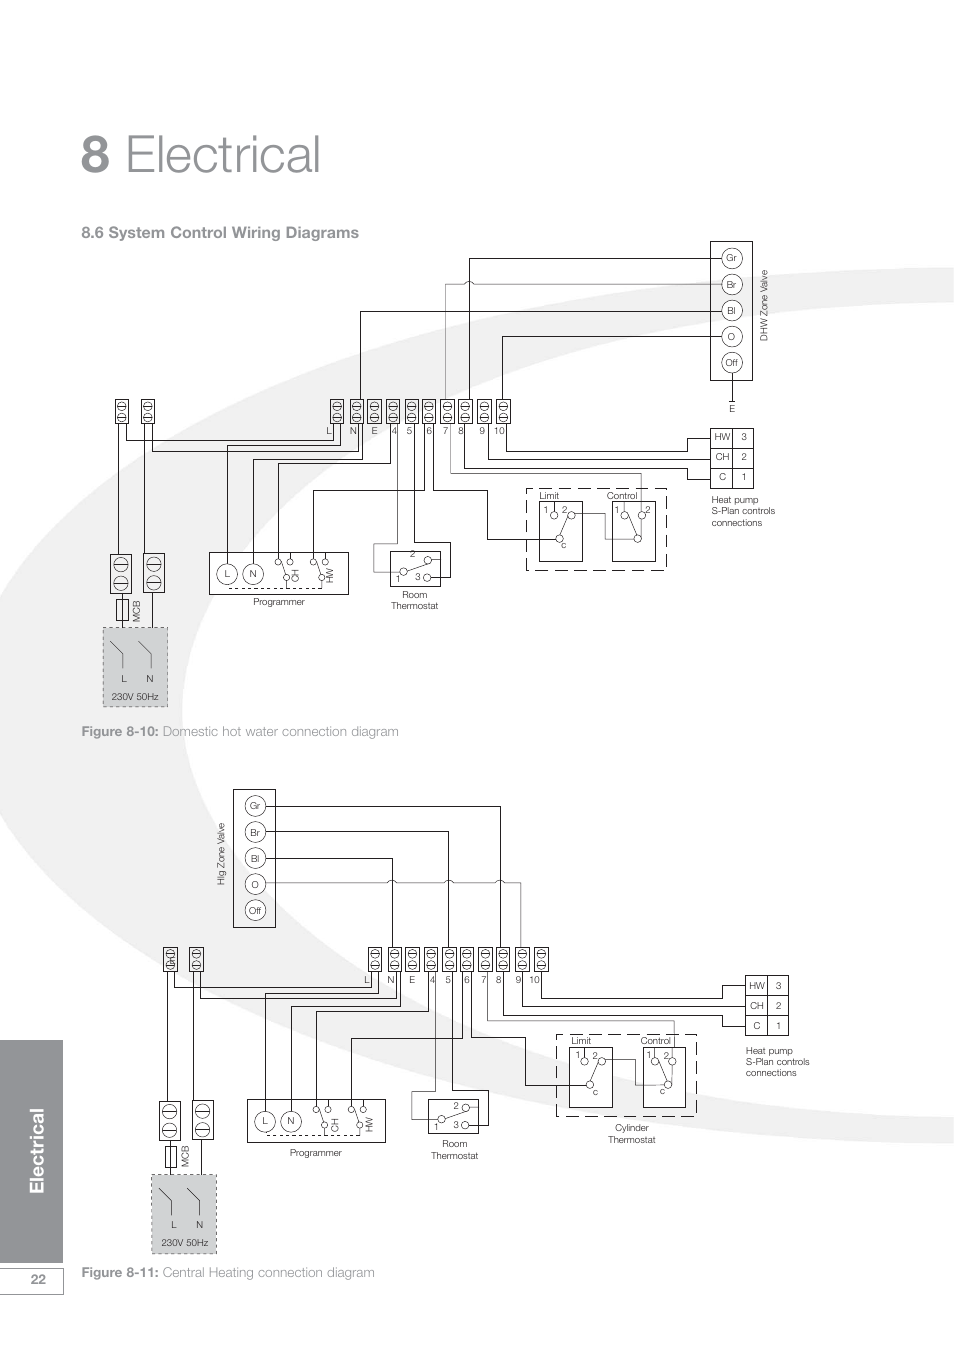 8 electrical, Electrical, 6 system control wiring diagrams | Grant Products HPAW155 User Manual | Page 26 / 50